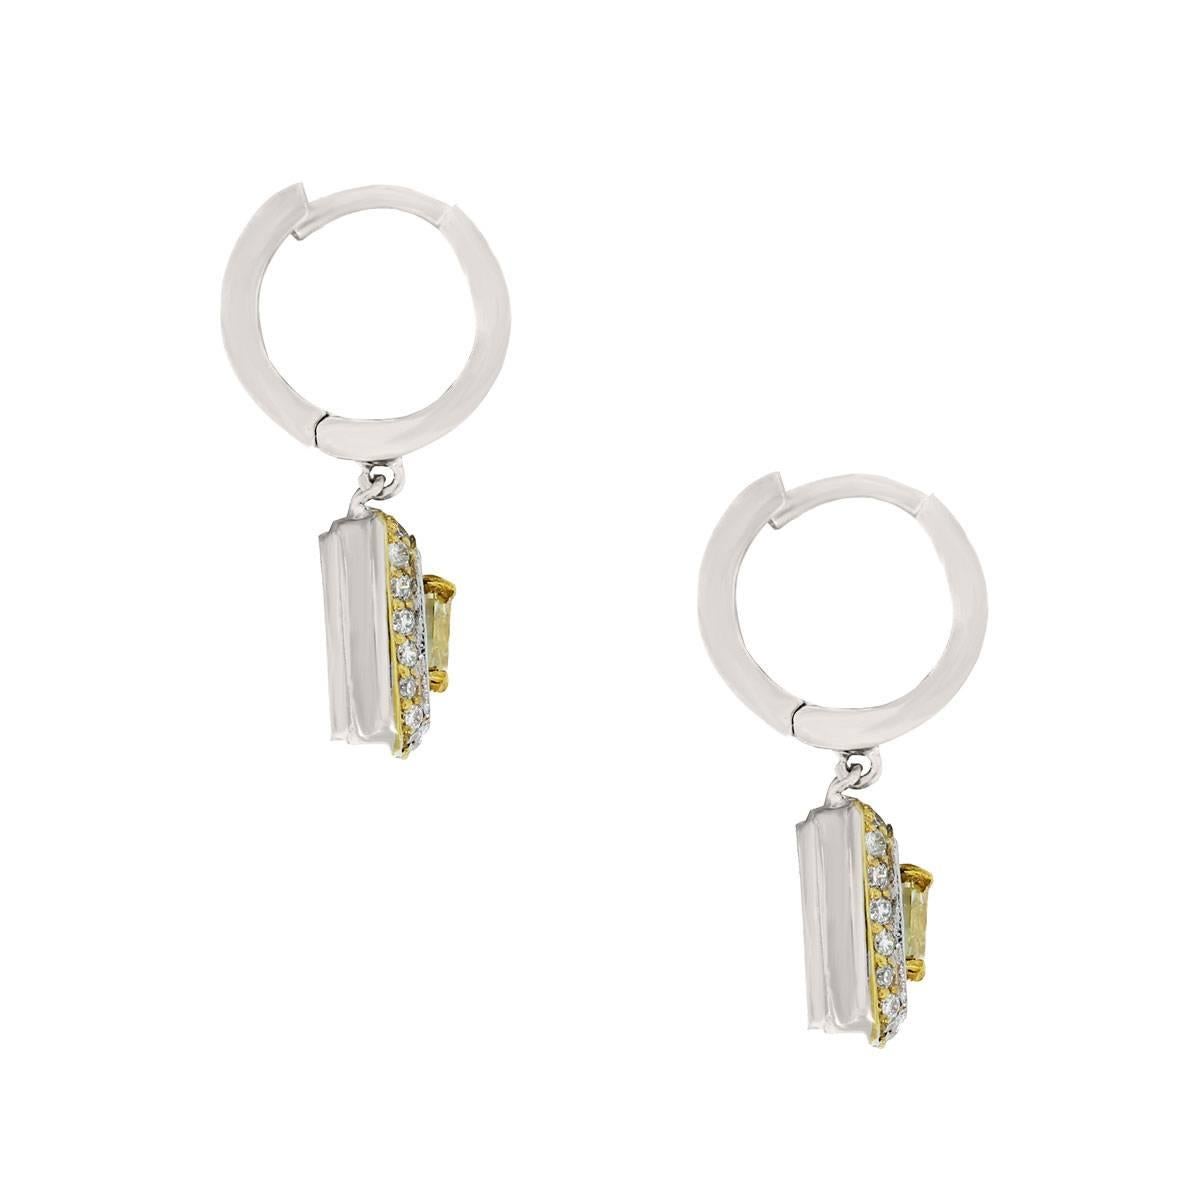 Style: 14k White Gold Fancy Yellow Cushion Diamond Dangle Earrings
Diamond Details: 2 Cushion Fancy Yellow Diamonds approximately 1ctw, diamonds are natural in color and VS in clarity.  Approximately 0.70ctw of Round Brilliant Diamonds, diamonds